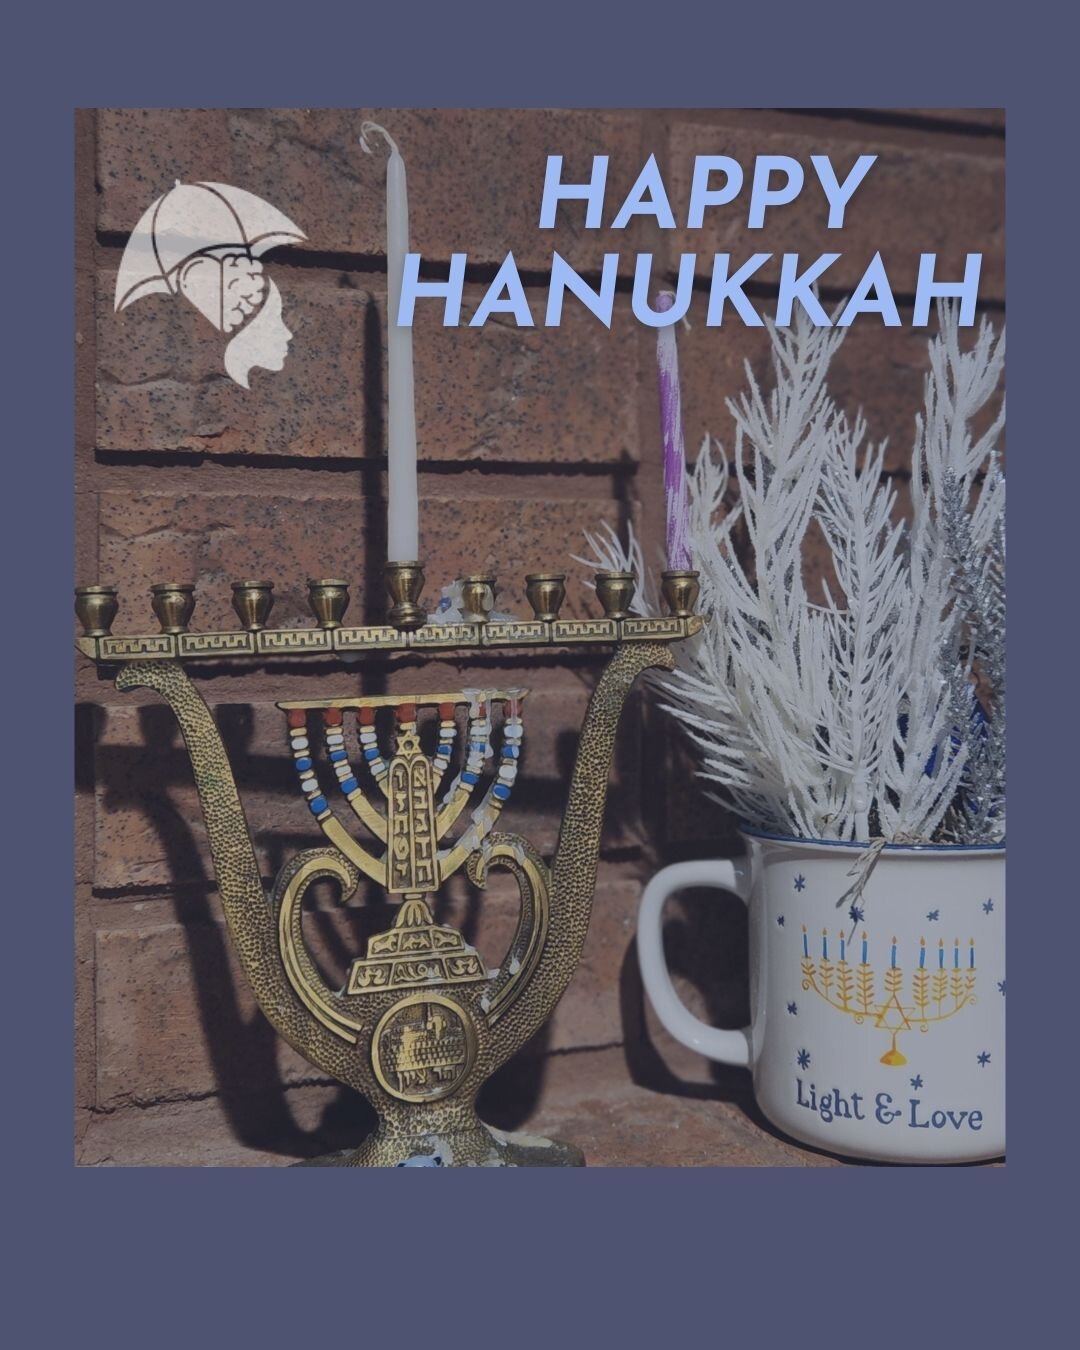 Happy Chanukah!  As the first candle glows tonight, let's take a moment to reflect on the significance of this beautiful Festival of Lights. 🕎
This year, perhaps more than ever, Chanukah's message of hope, unity, and resilience shines brightly. 

Ma